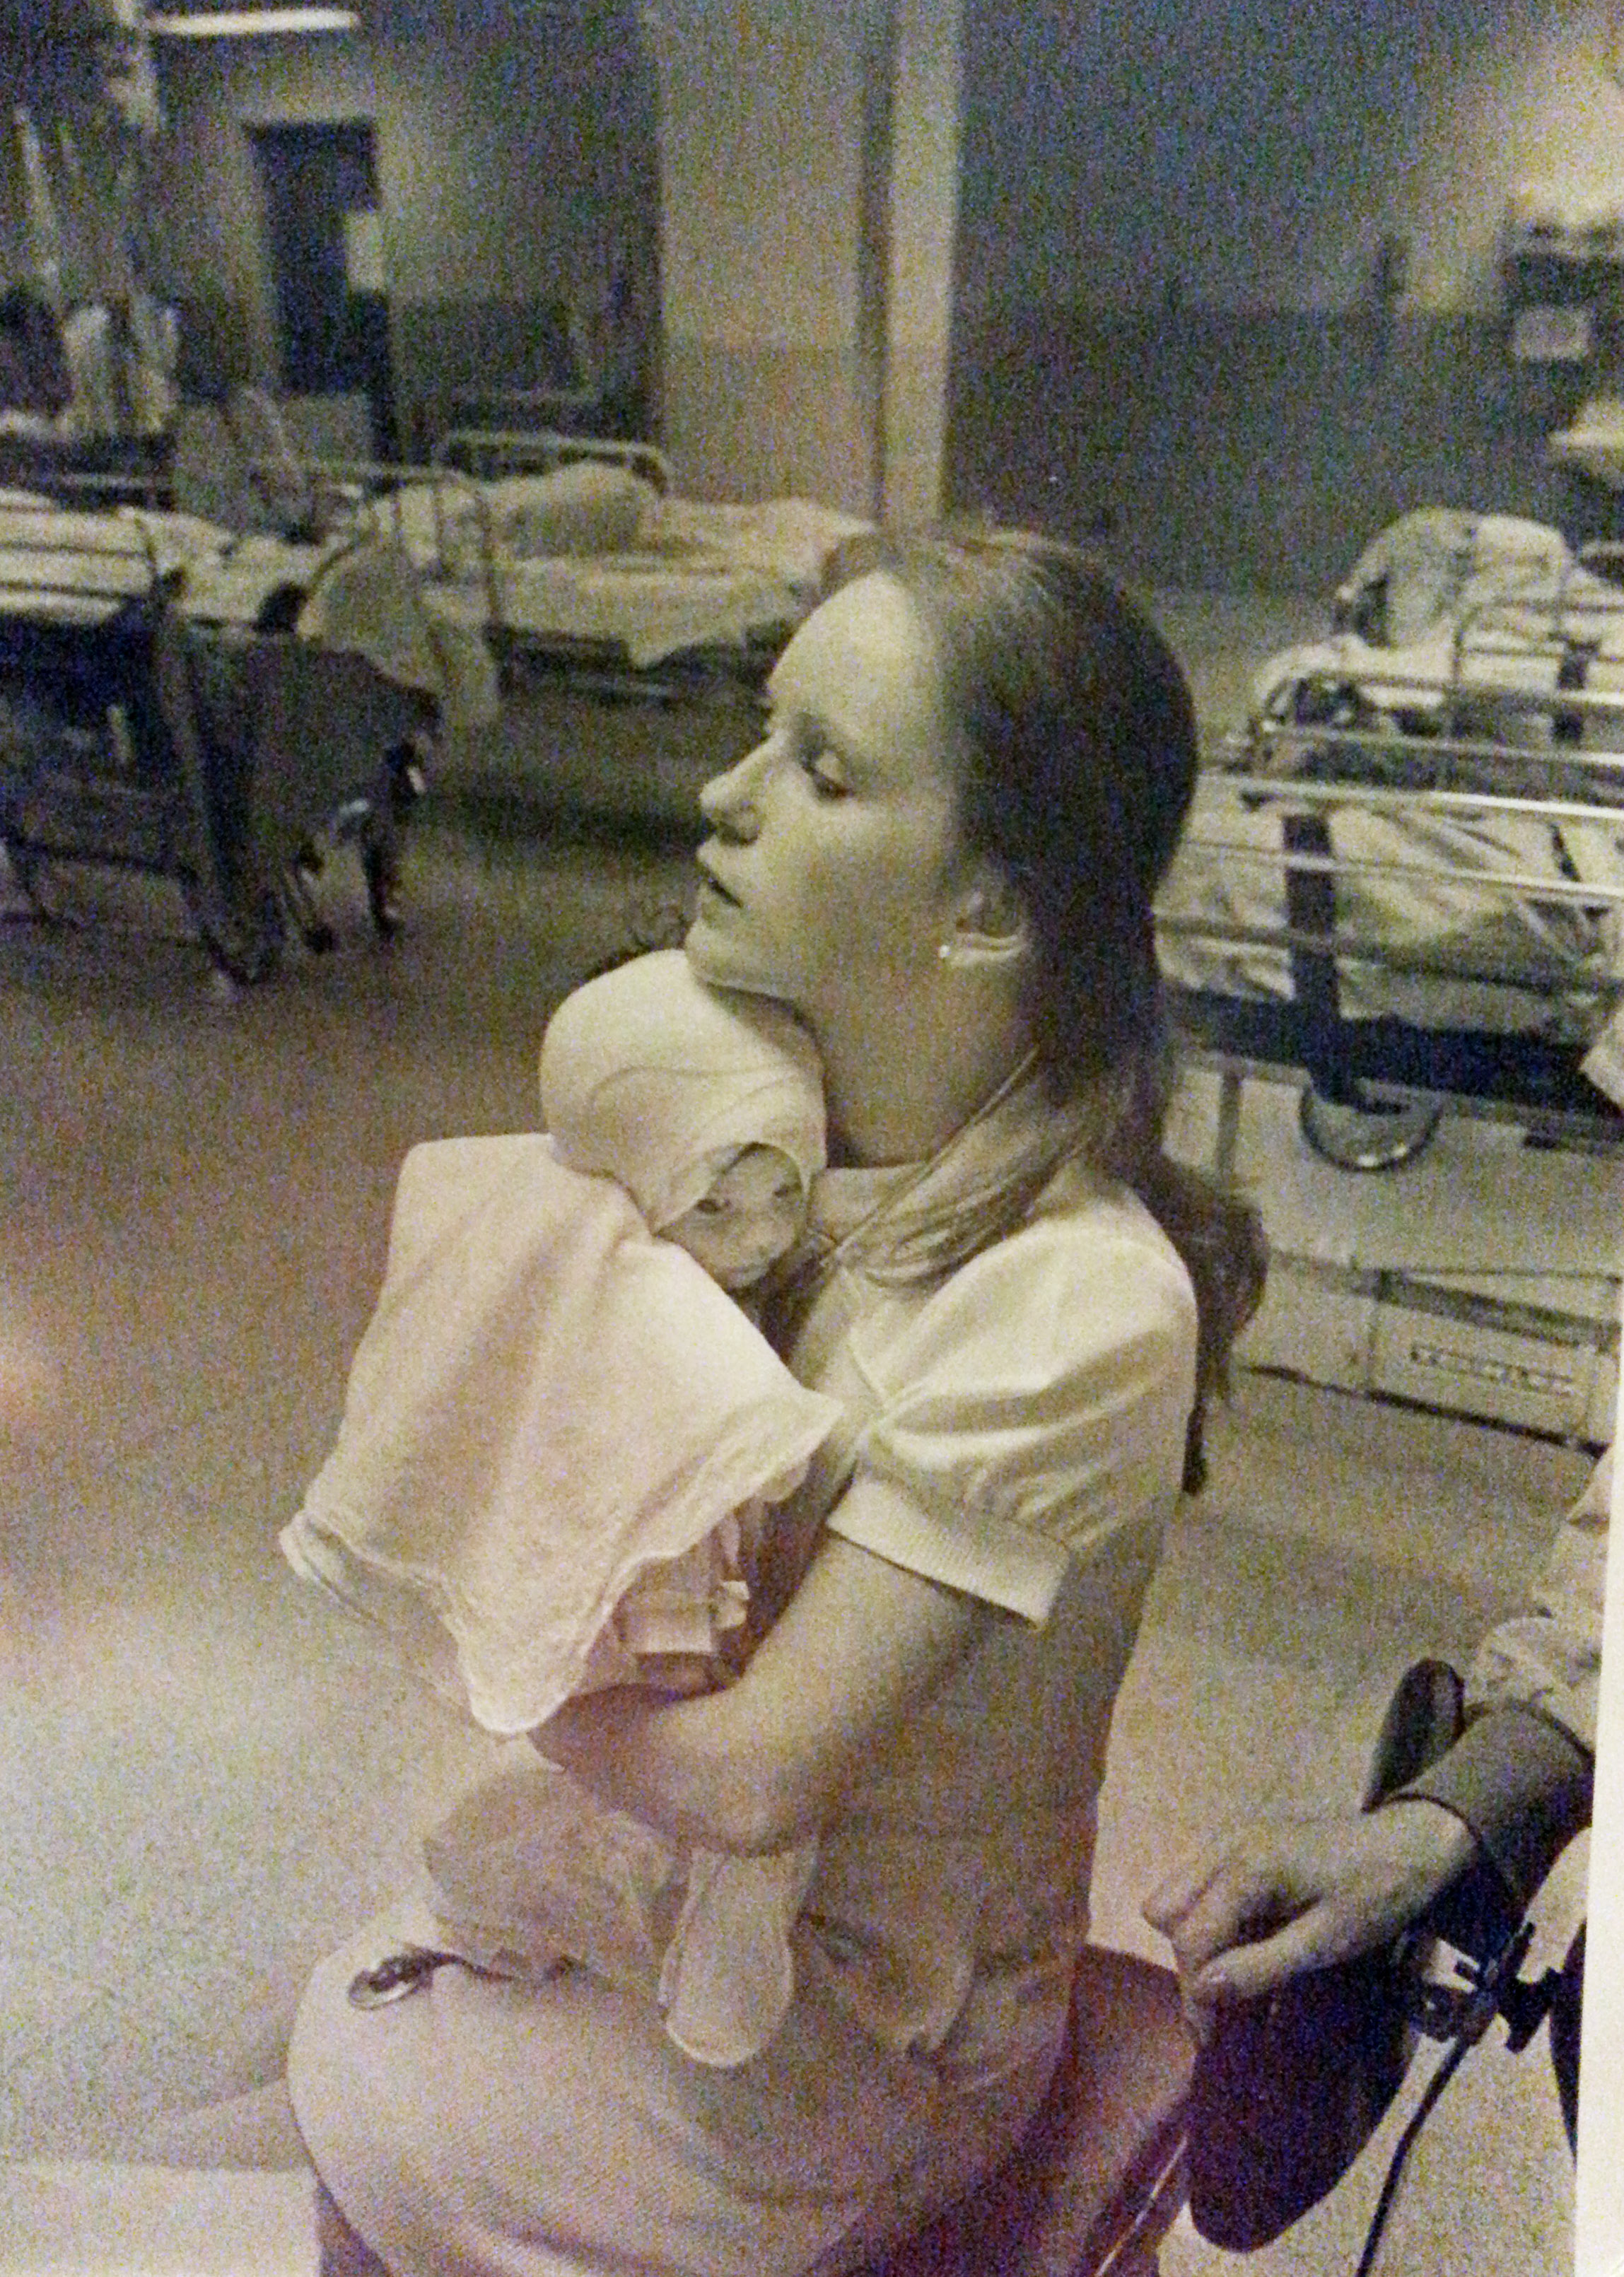 In this 1977 photo provided by Albany Medical Center, nurse Susan Berger cuddles infant Amanda Scarpinati, who had been severely burned by a steam vaporizer at home, in the pediatric unit at Albany Medical Center in Albany, N.Y.